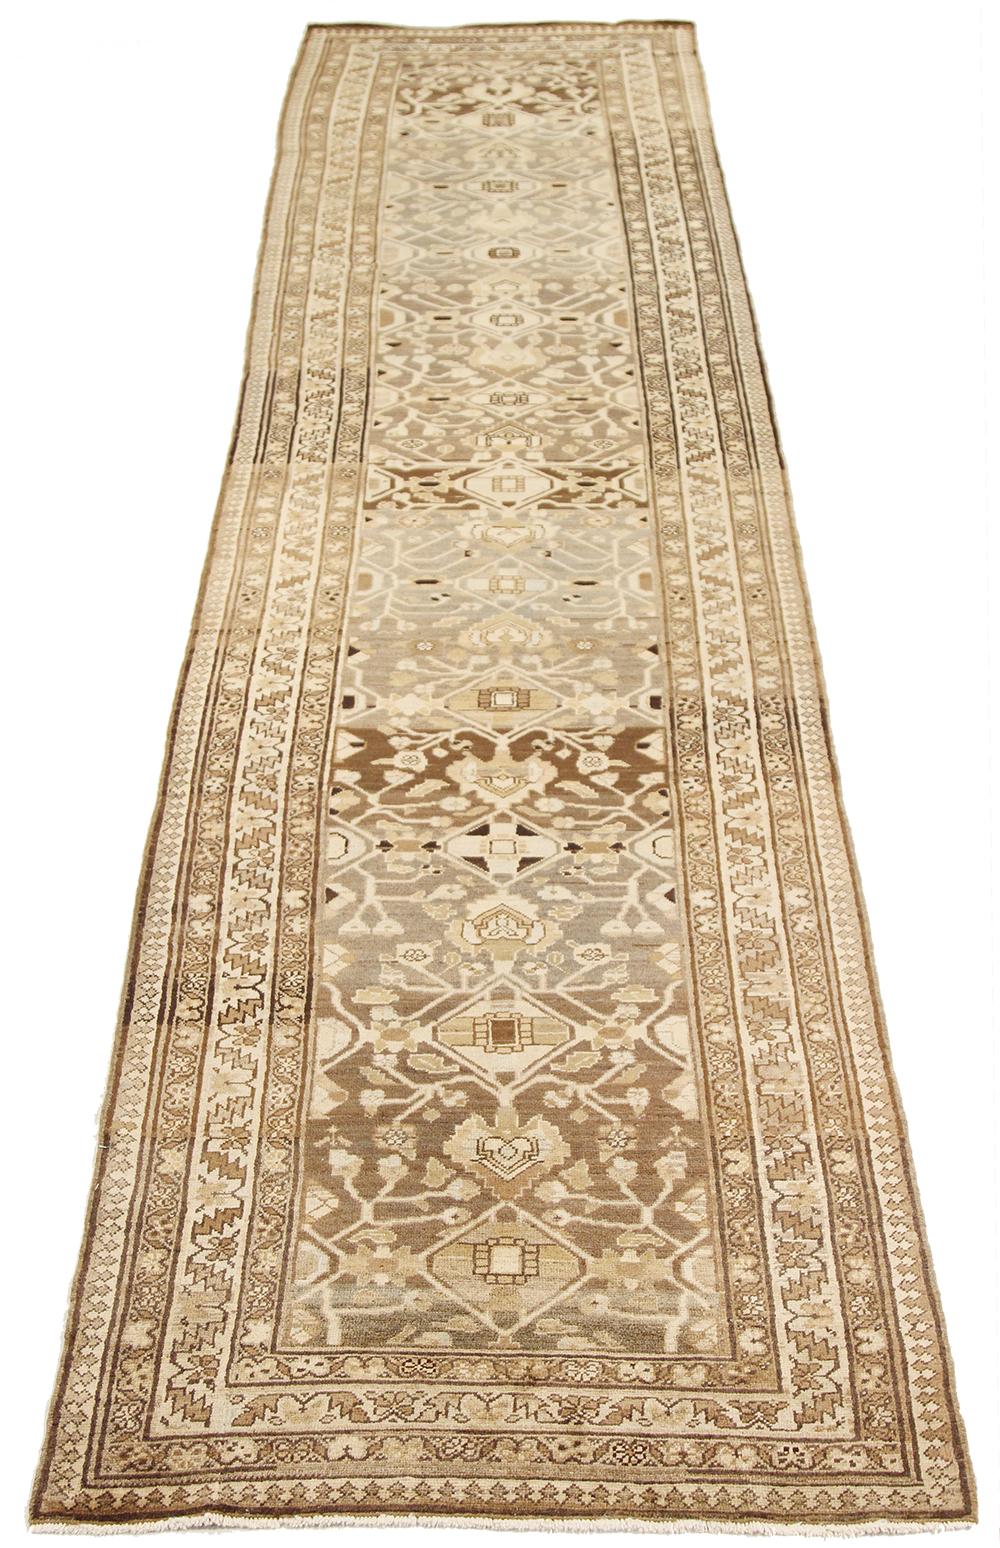 Antique Persian runner rug handwoven from the finest sheep’s wool and colored with all-natural vegetable dyes that are safe for humans and pets. It’s a traditional Malayer design featuring beige and brown tribal details. It’s a lovely piece to